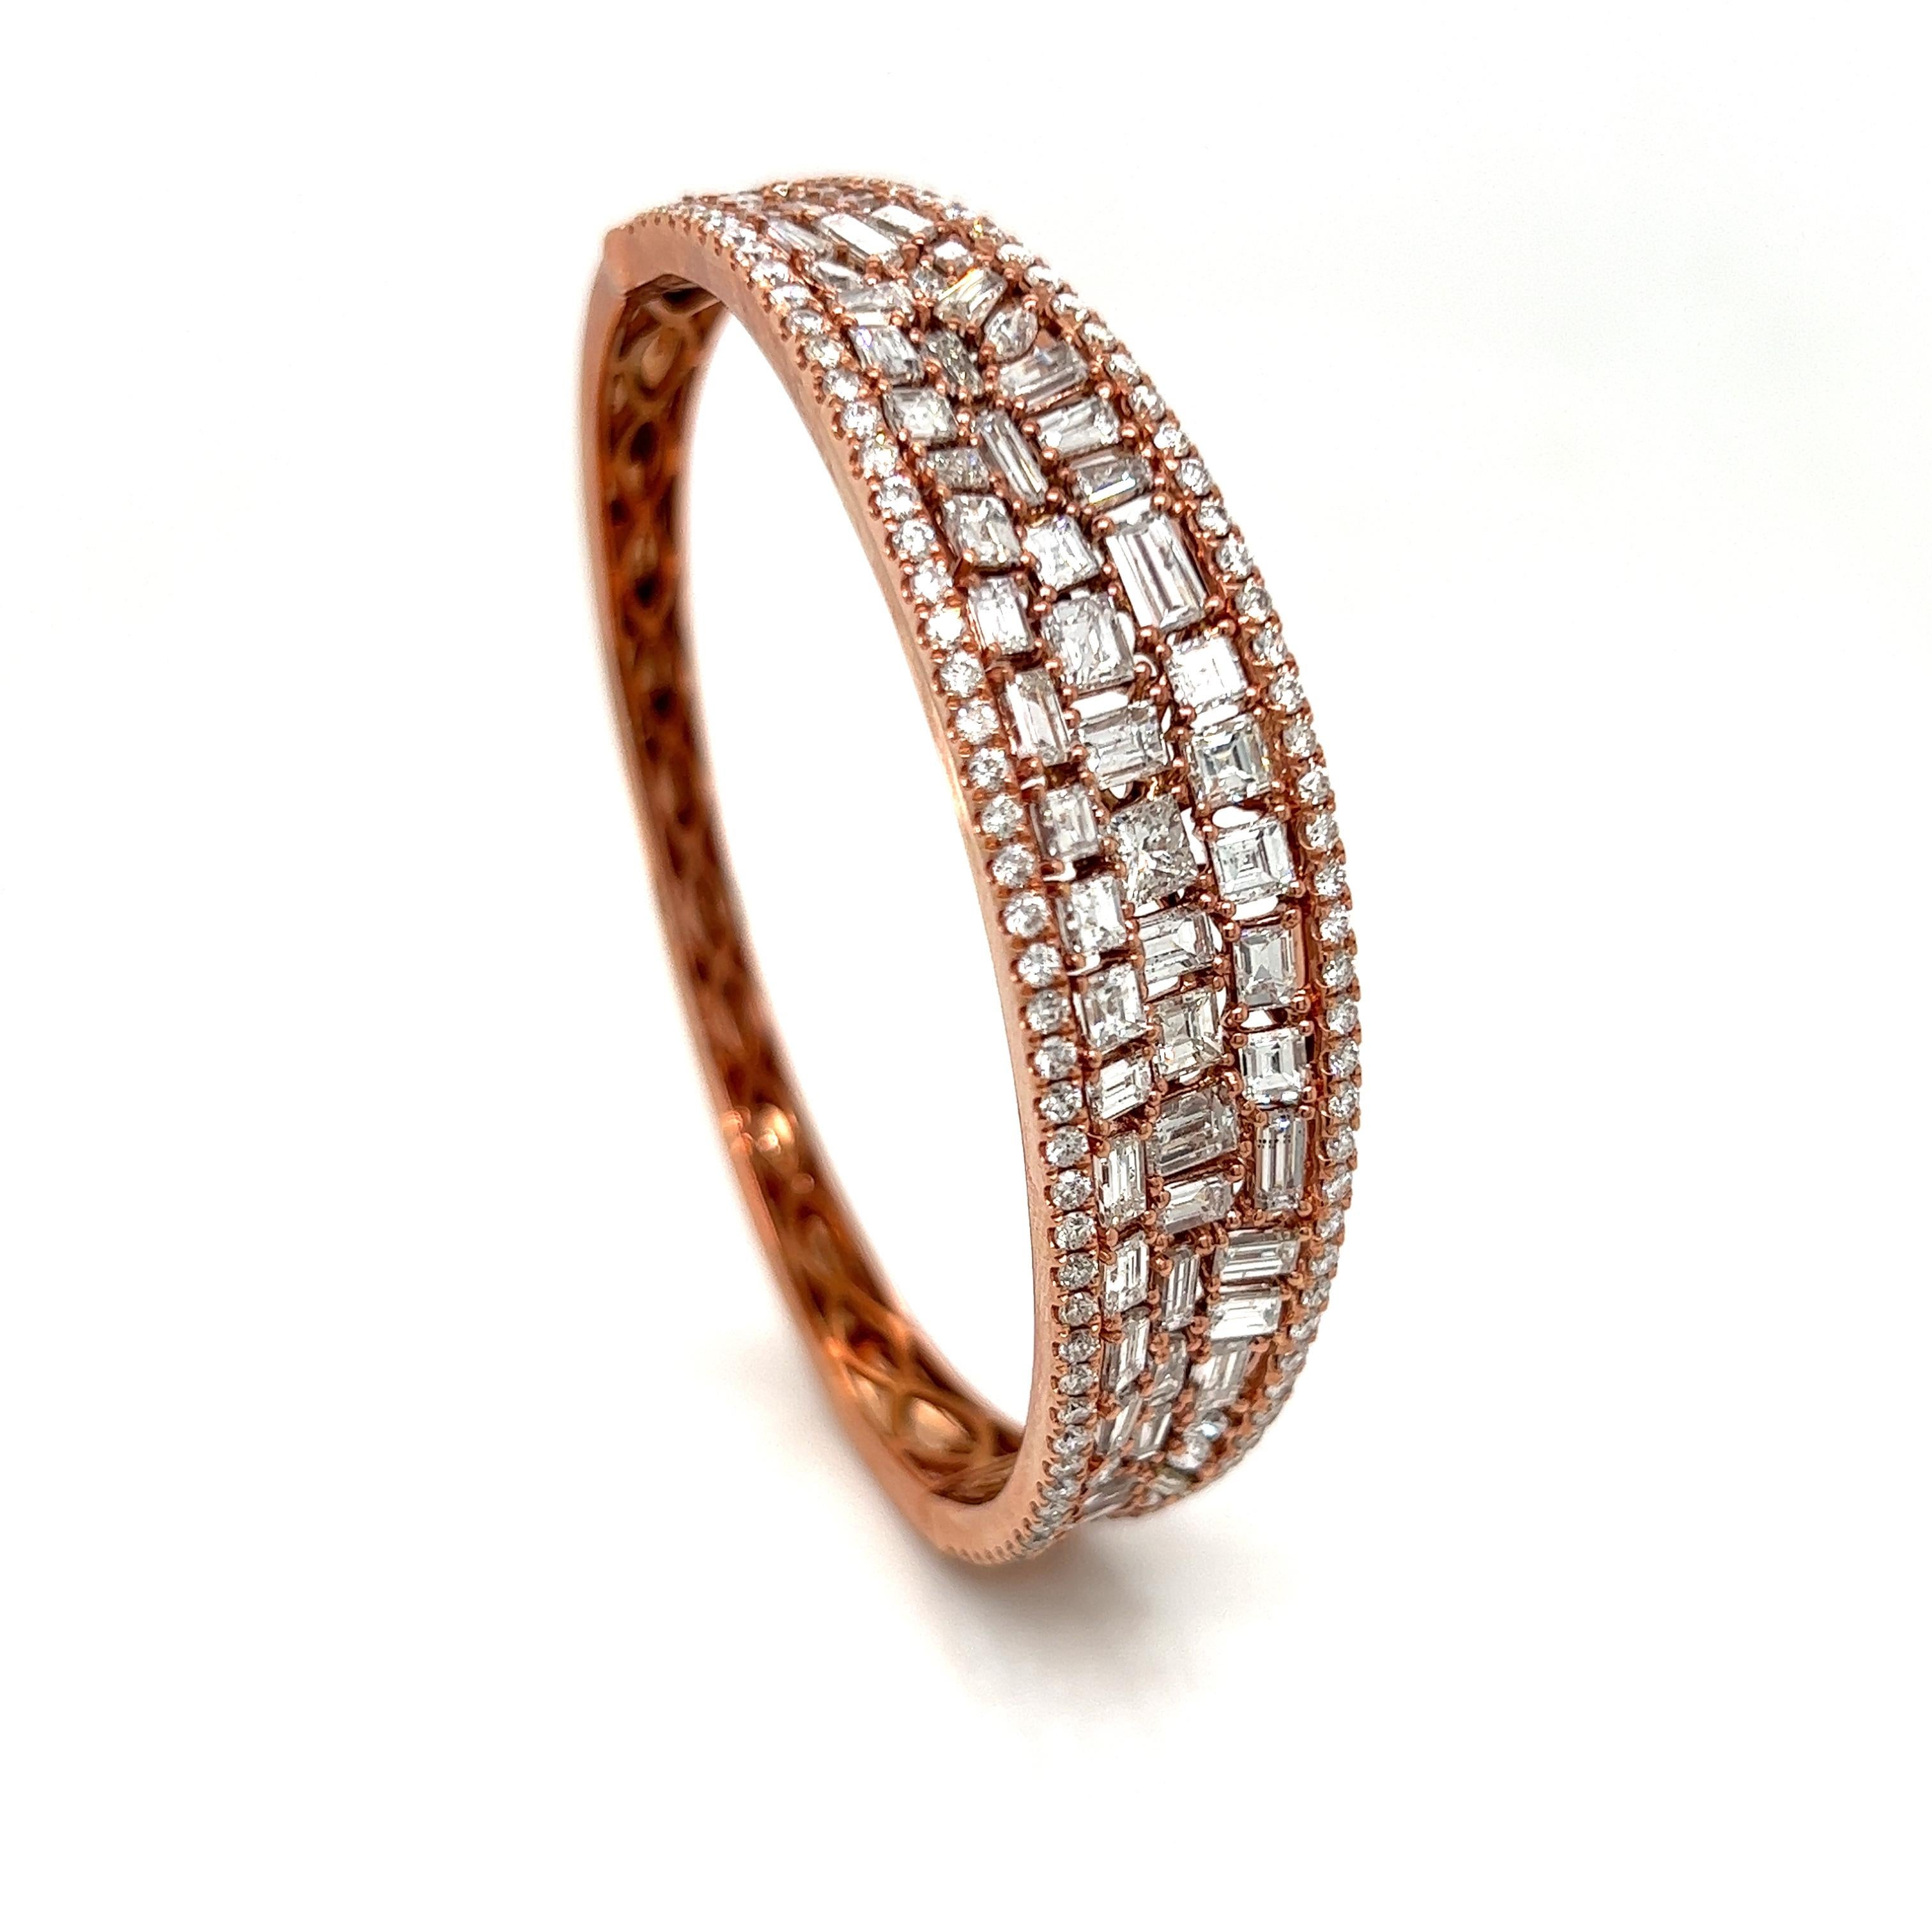 Exquisite designer diamond bangle.  Asscher, round, baguette and princess cut diamonds are expertly crafted into this bangle.  A total of 9.20 cttw in VS-SI clarity and G-H color diamonds in 18K Rose Gold.  185 diamonds make this unique bangle